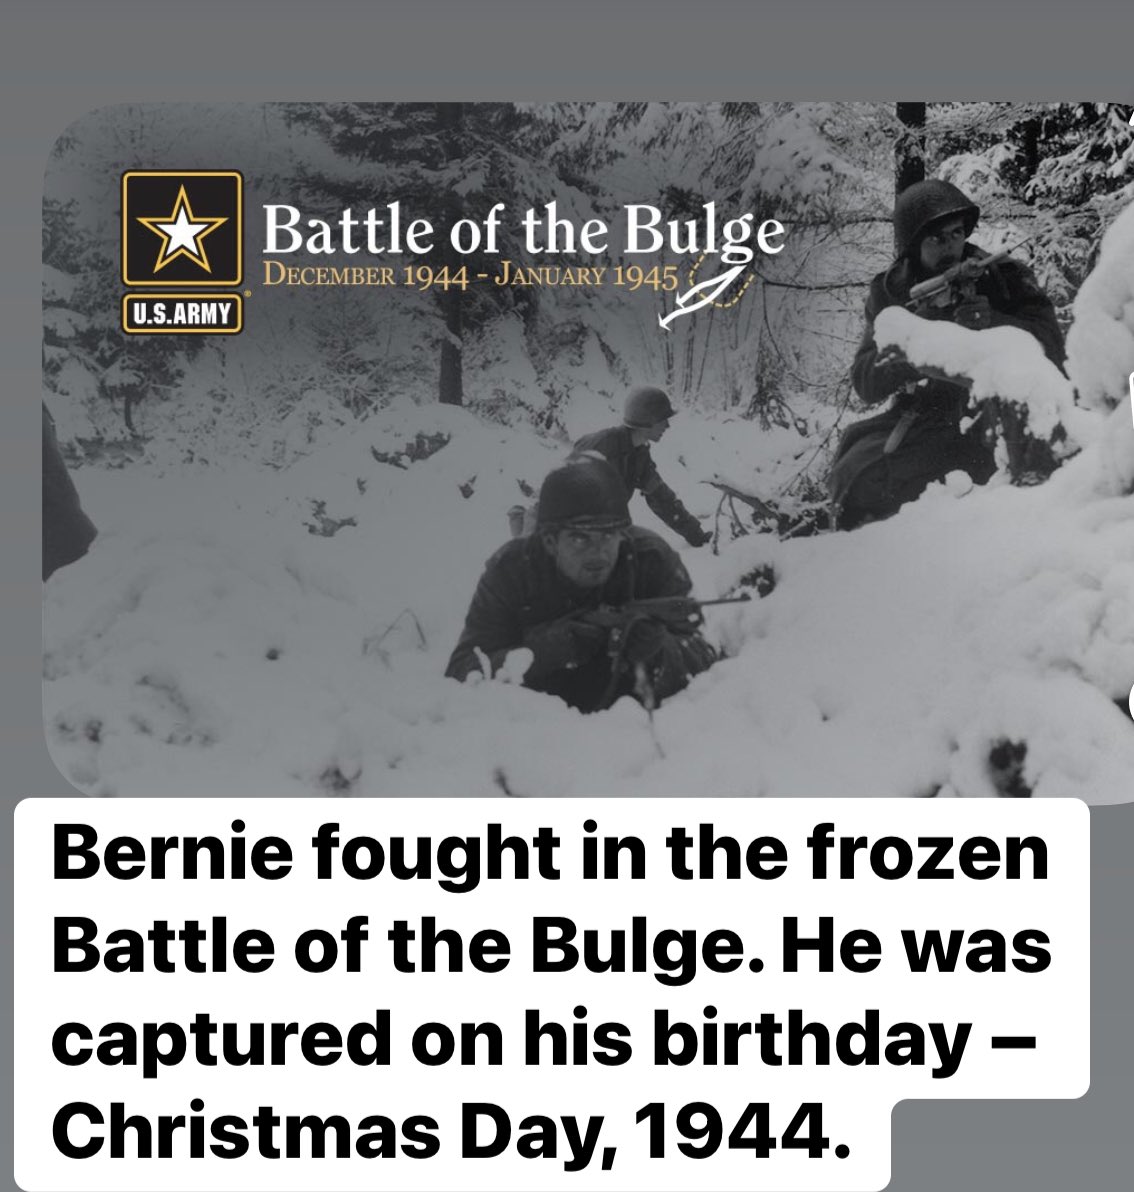 Memorial Day-I ponder how US soldiers froze in the Battle of the Bulge, X-Mas ‘44 to secure our freedom 80 yrs later. Some gave more,my father,Bernie Singer, captured there & taken to Stalag 9B in Germany. At 101,maybe the oldest surviving POW. @NormOrnstein @LarrySabato @sbg1